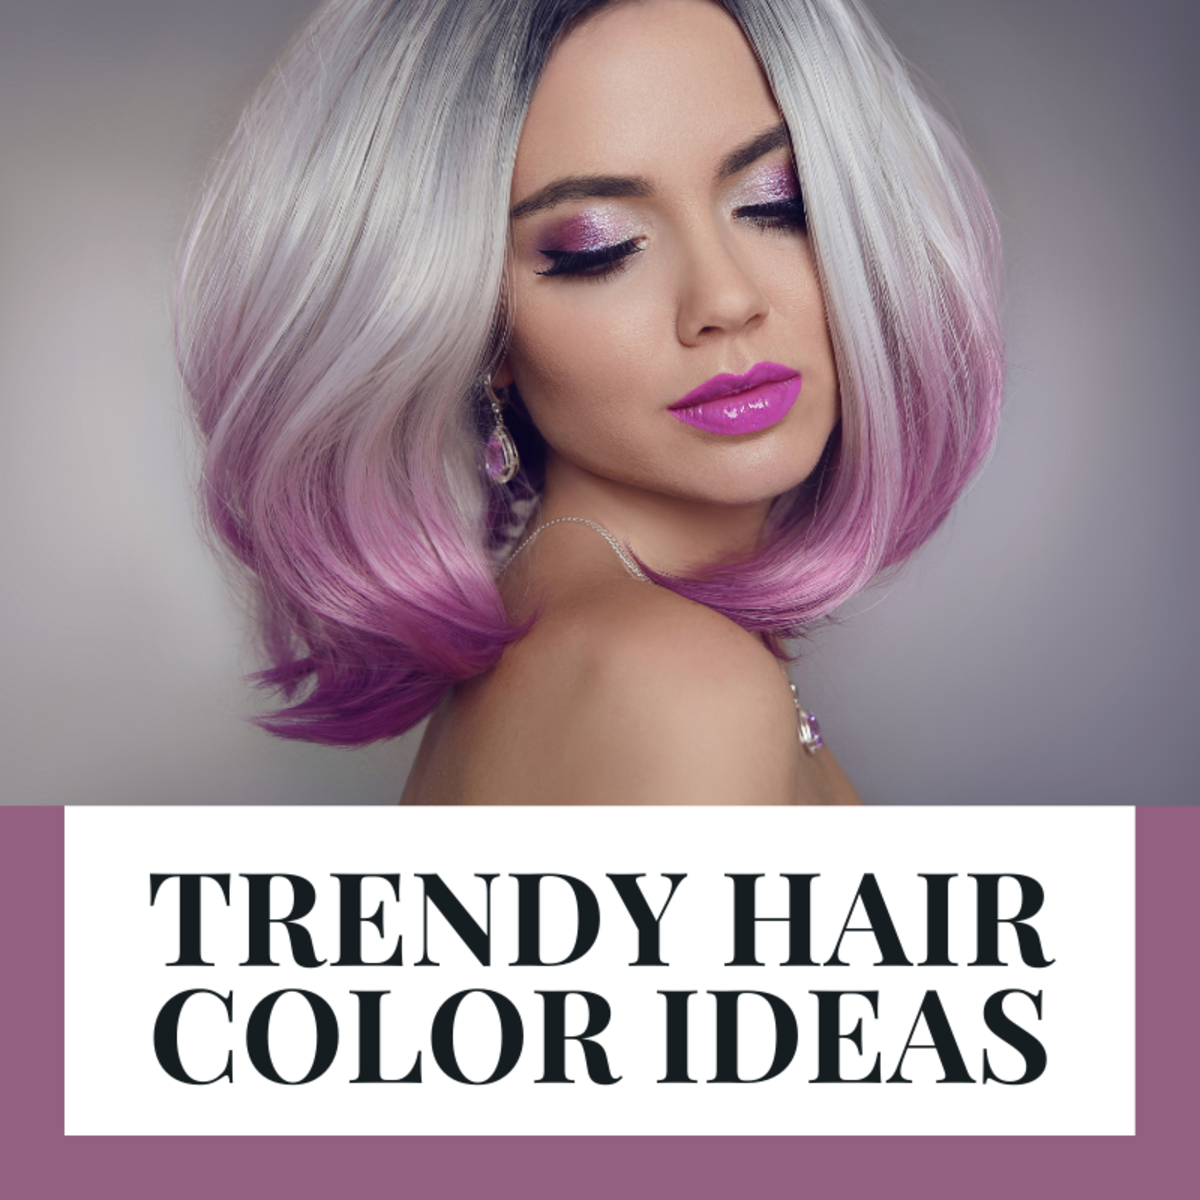 Trendy, modern styles like this brightly-contrasting ombre violet and platinum hair look great.